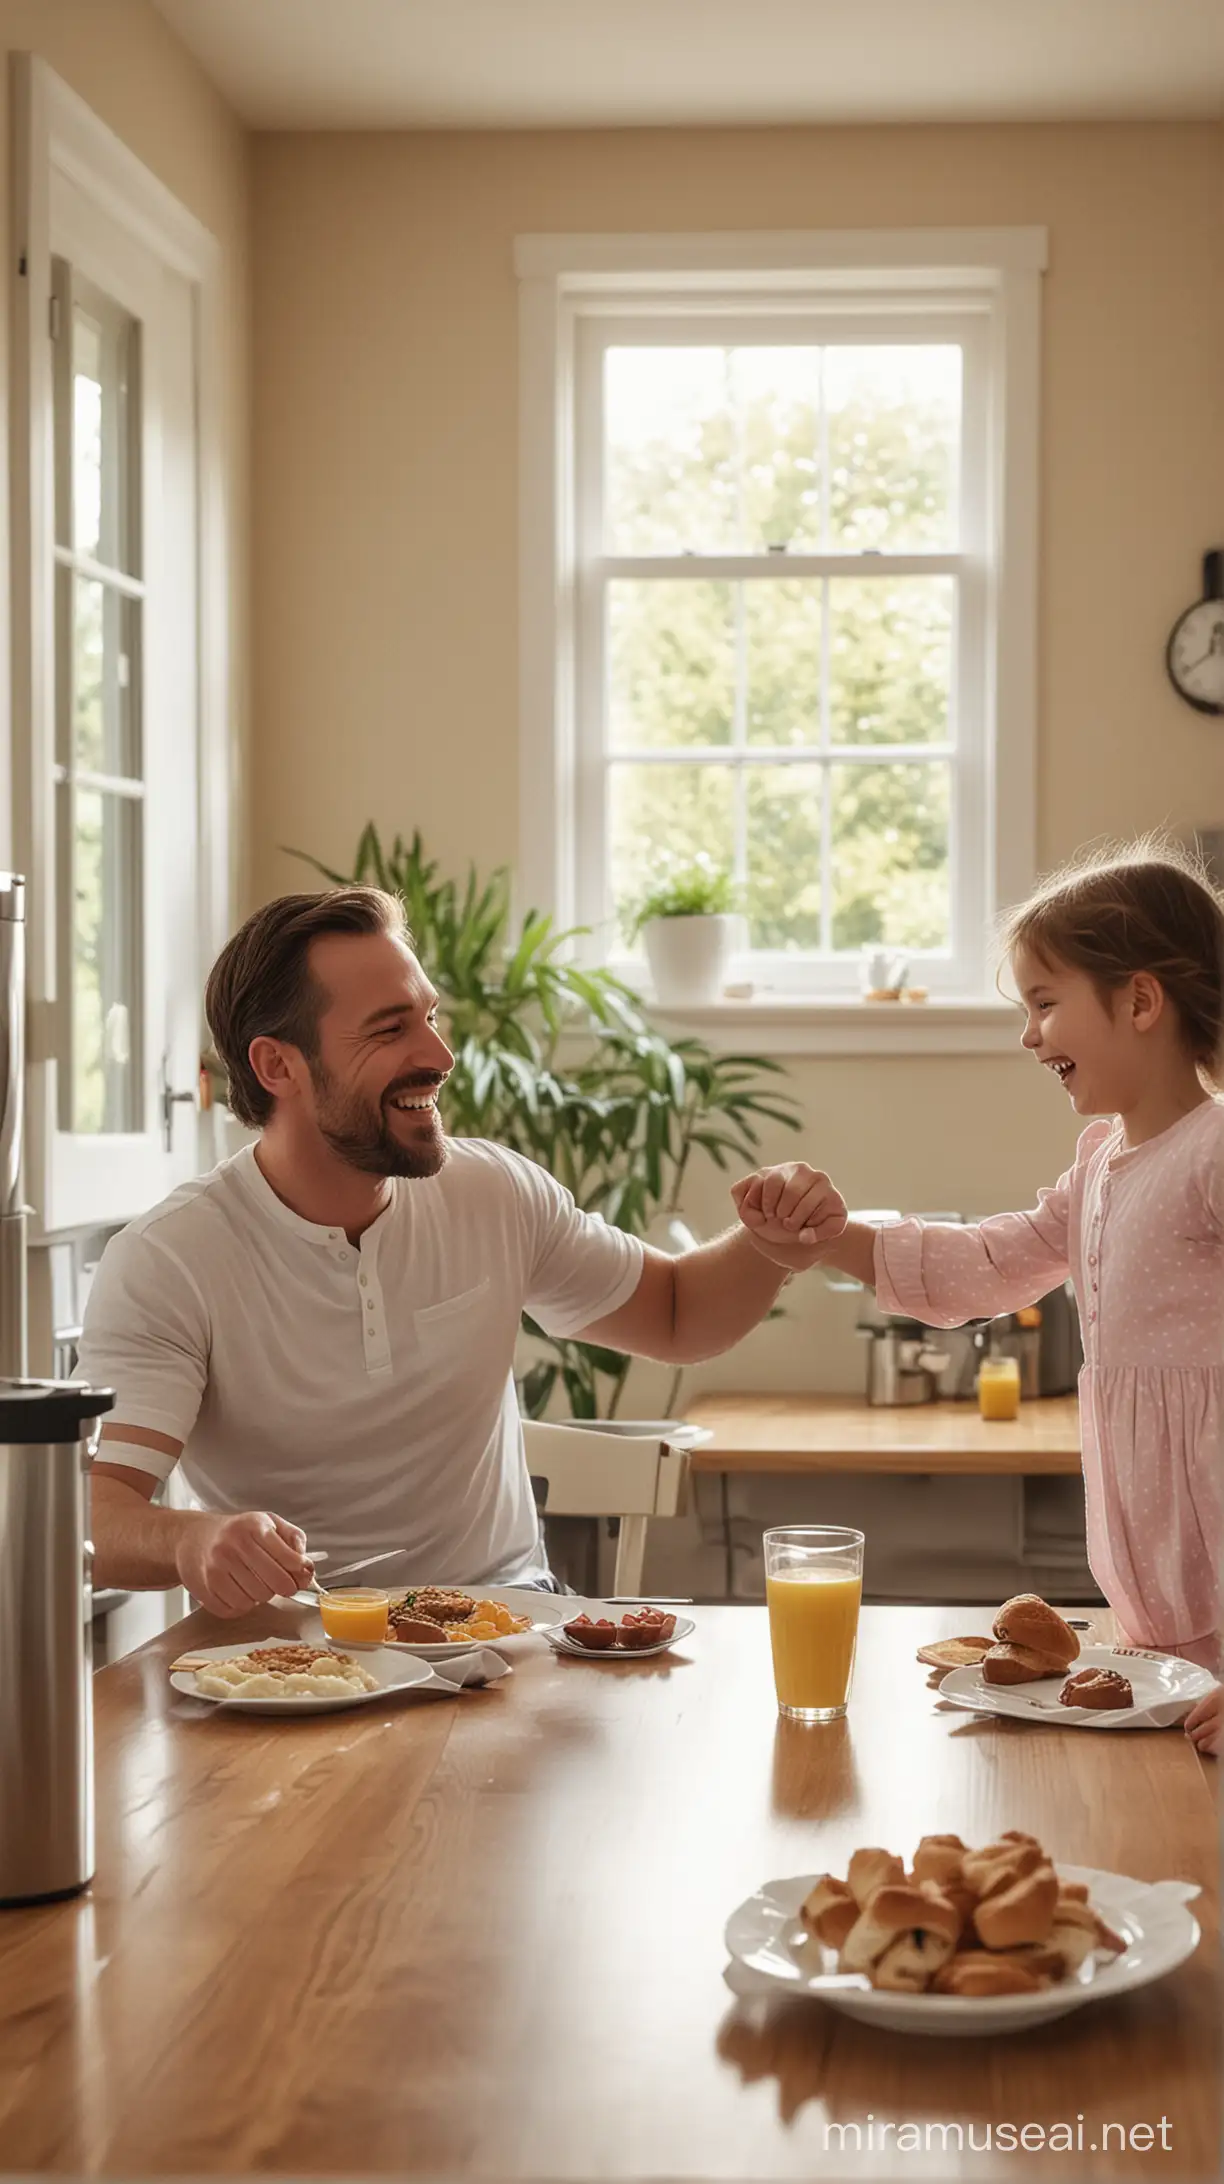 Loving Father Embracing Joyful Daughter at Breakfast Table in Cozy Kitchen Scene